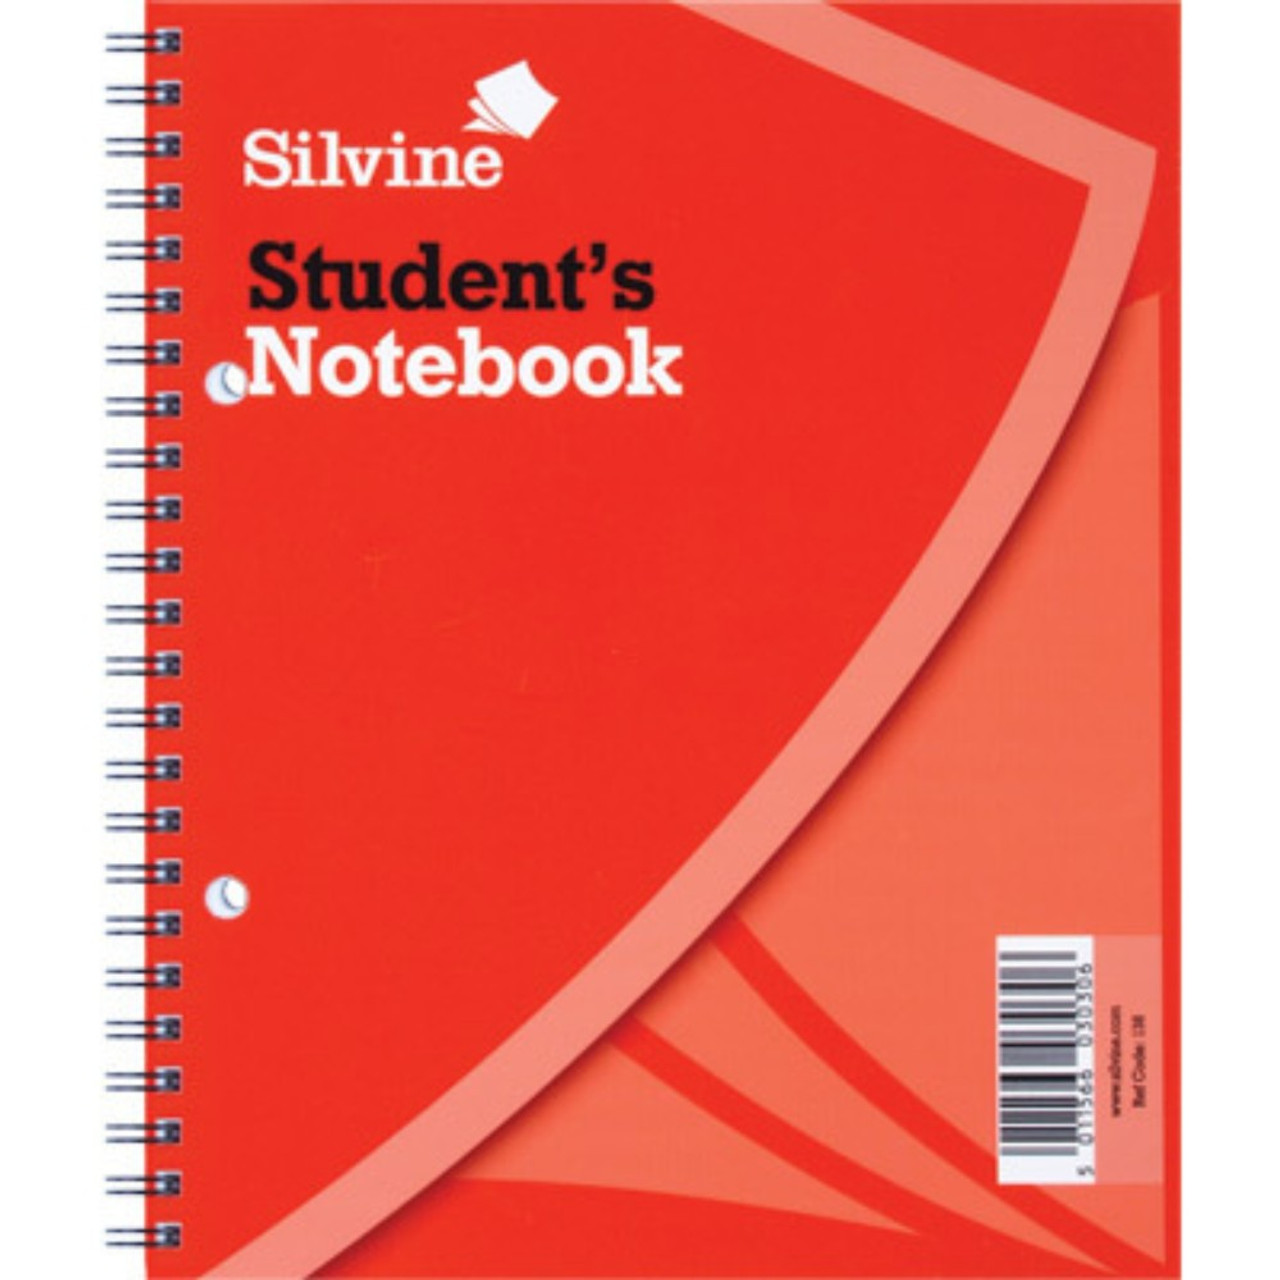 Twin Wire Student's Notebook, 203x163mm, Narrow Lined, Quality Paper, 120 Pages